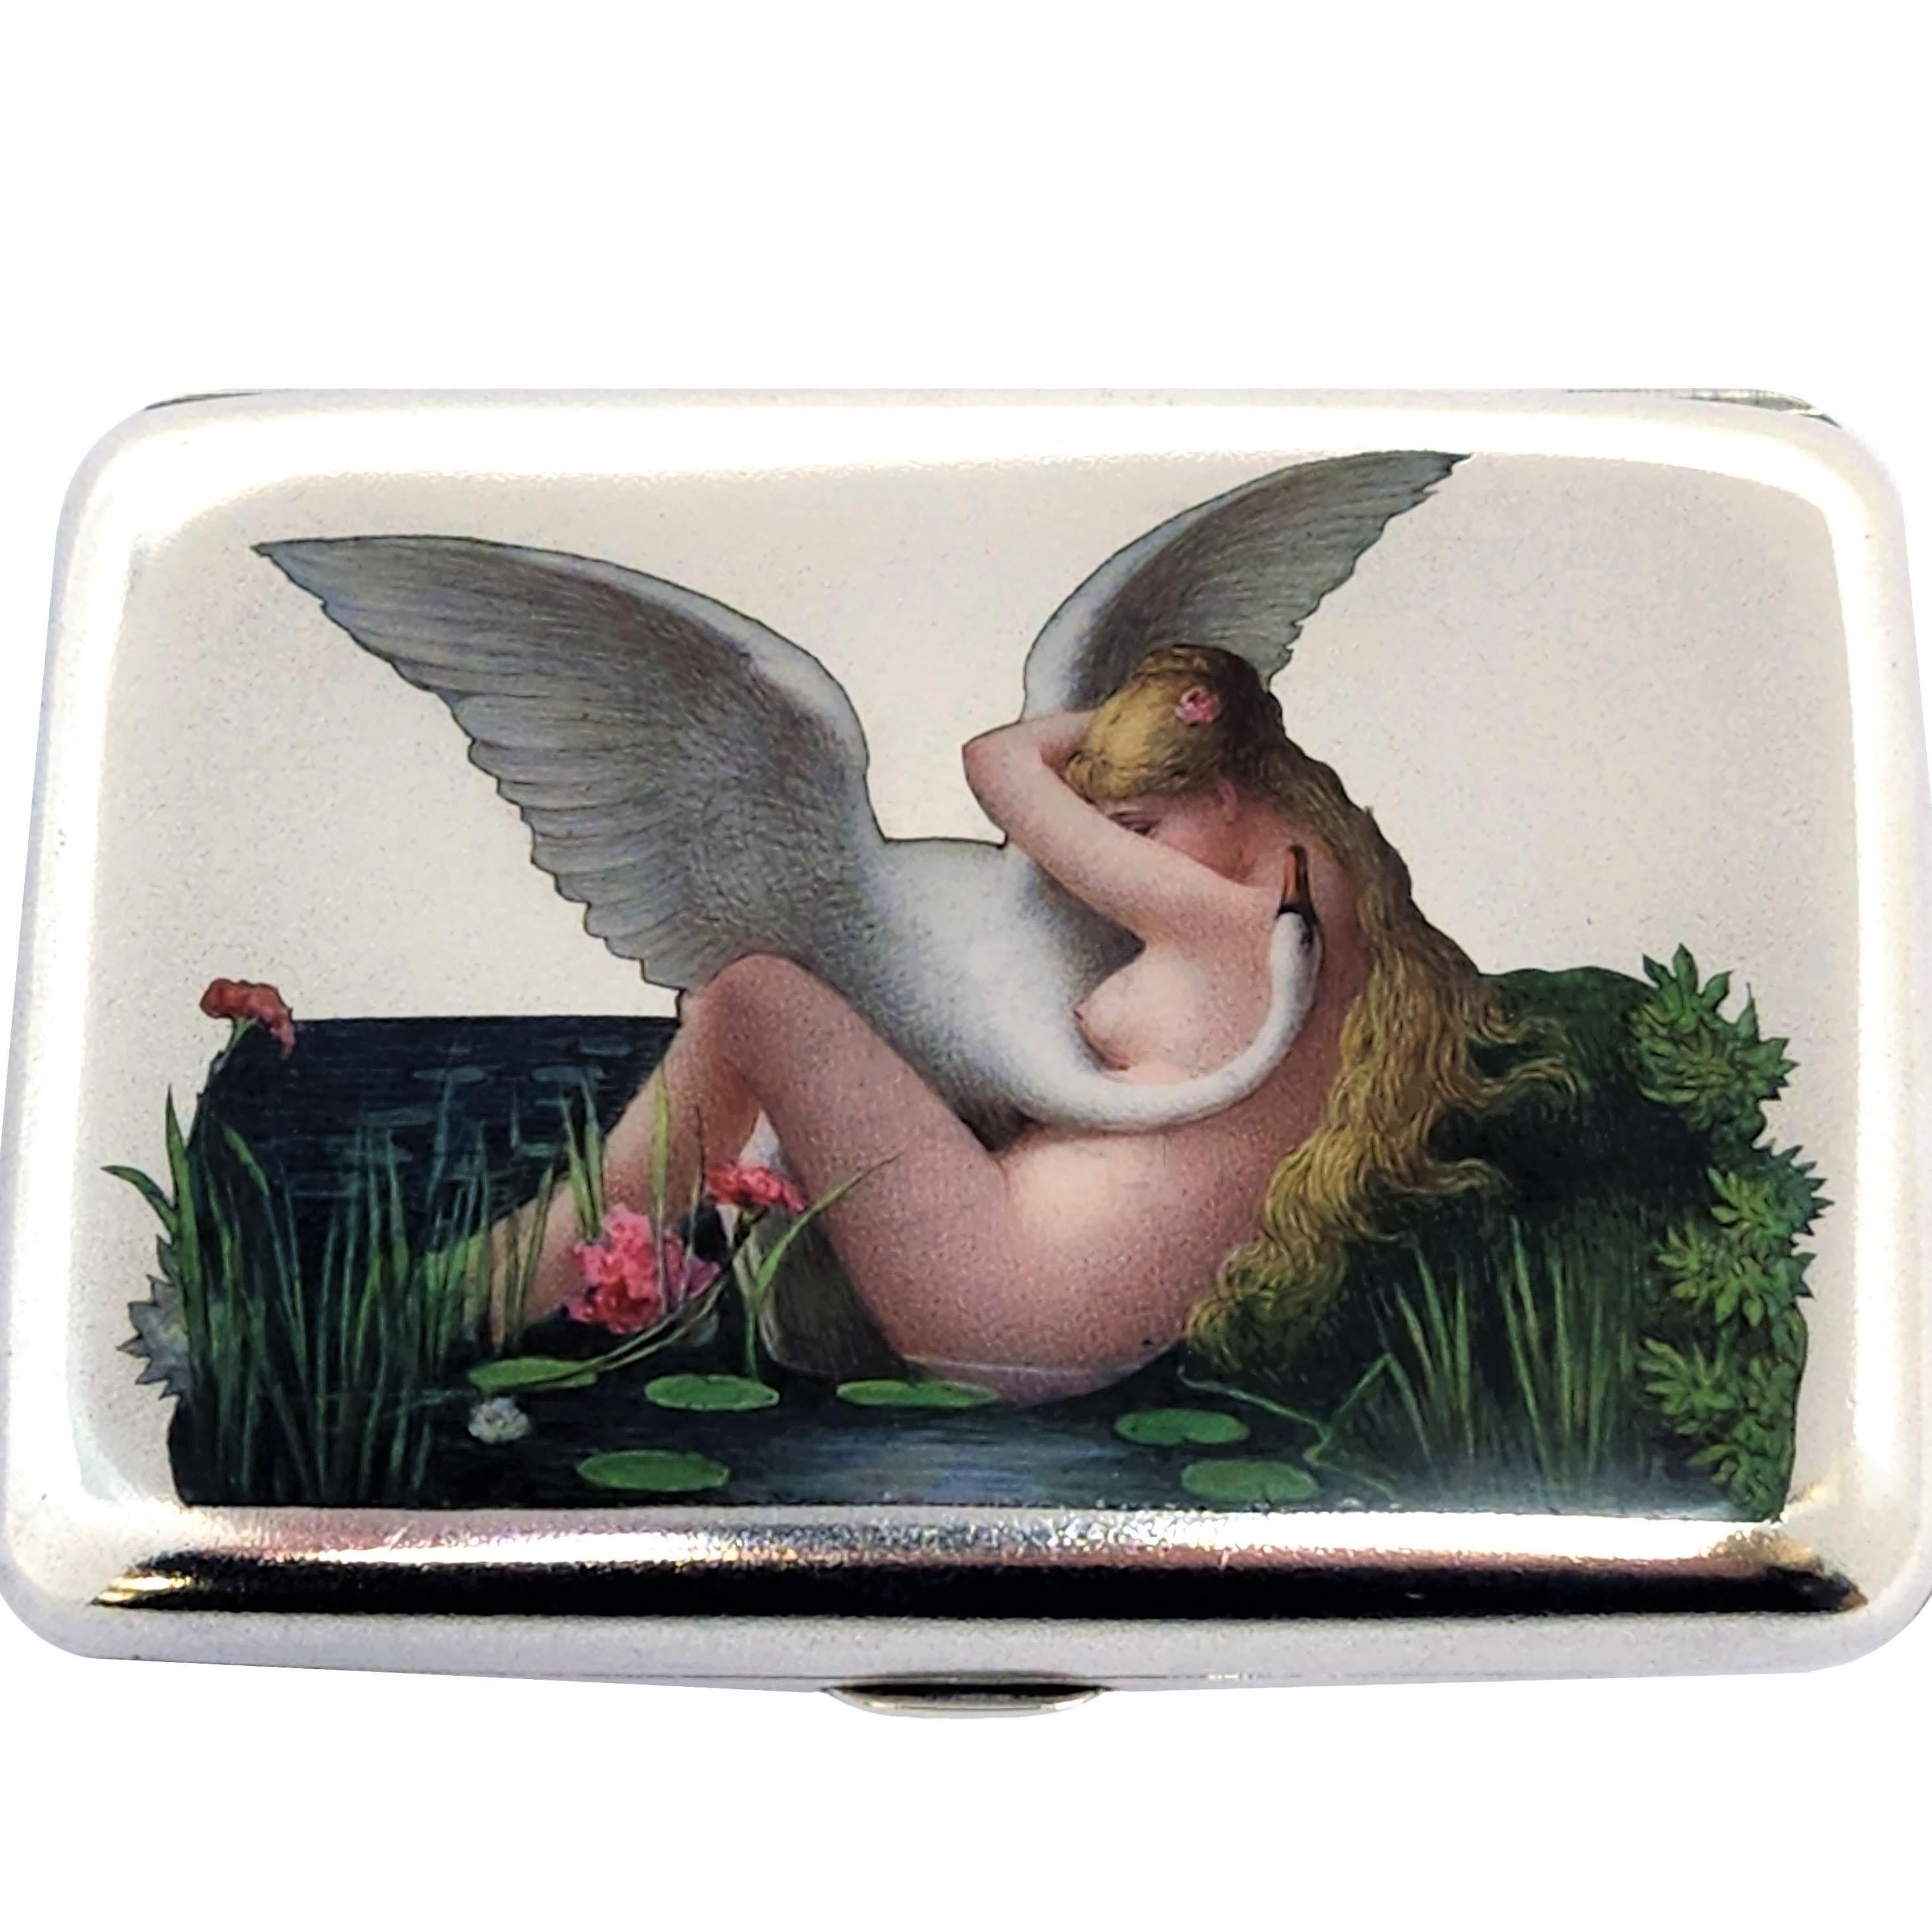 A beautiful Antique Silver & Enamel Cigarette Case with an enamelled image Leda and the Swan on the front cover in beautiful rich enamel colours. The interior of the case is gilded and the back of the case is plain silver. 

The Cigarette Case was